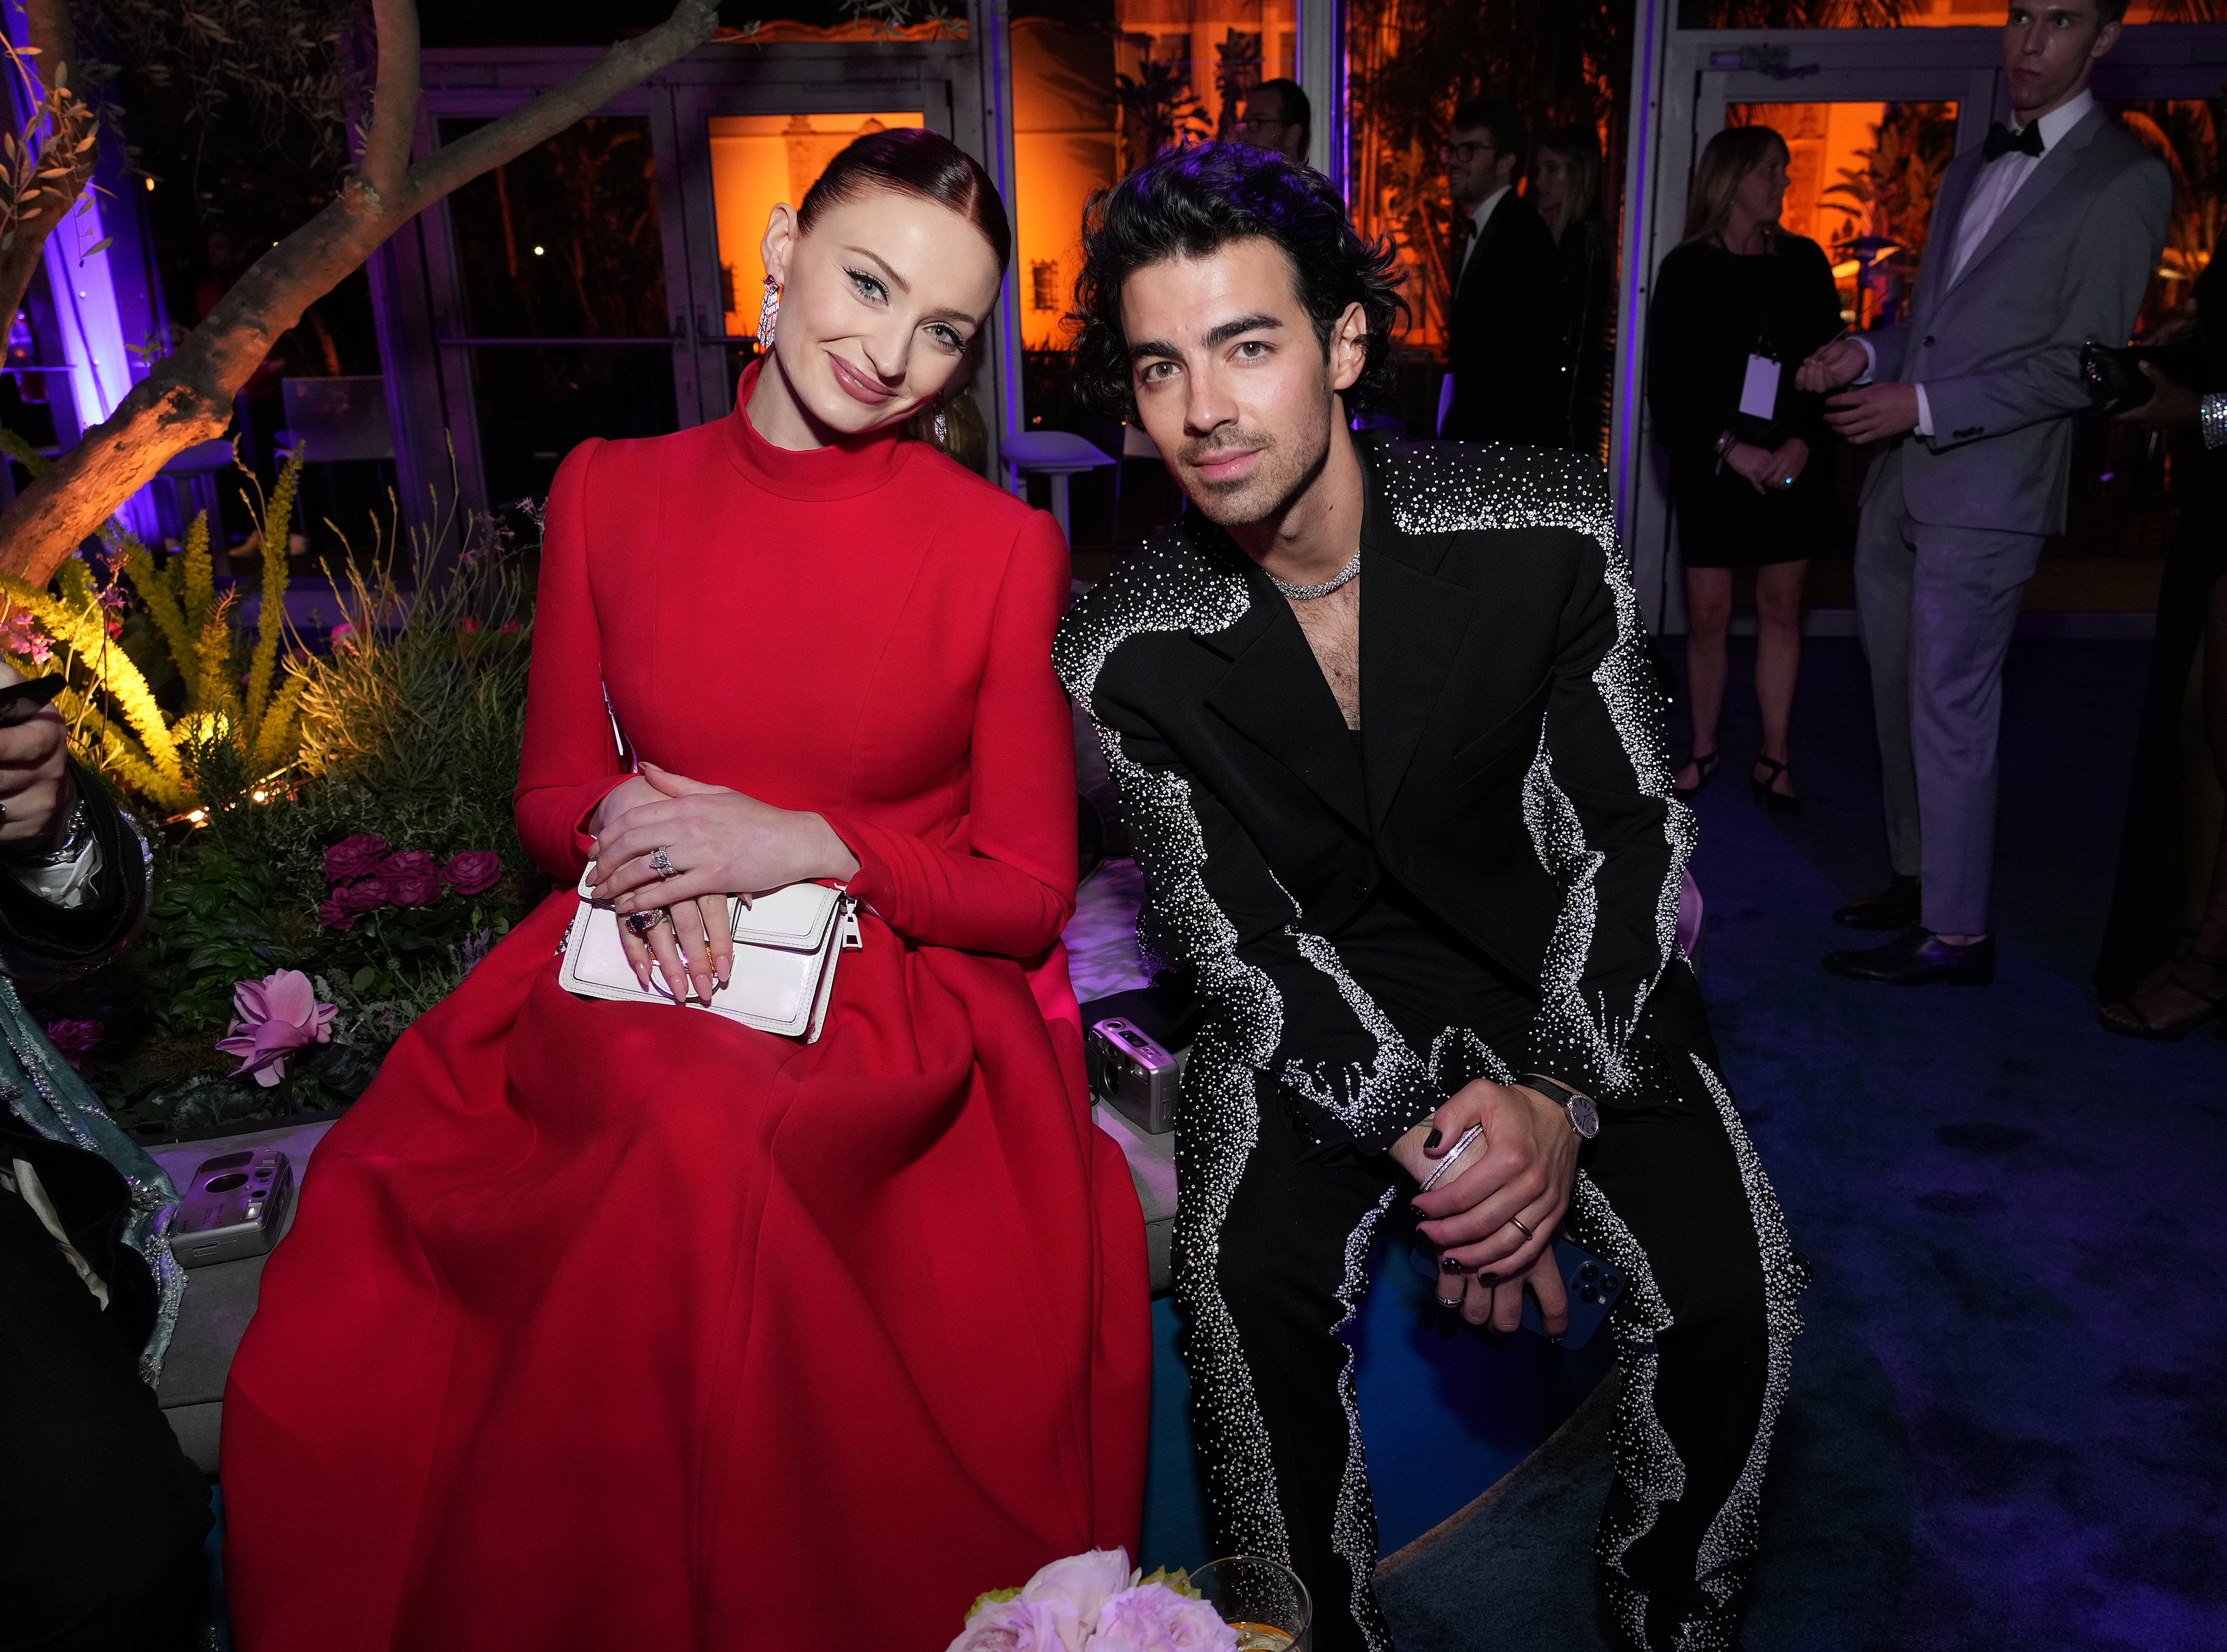 Close-up of Joe and Sophie sitting together